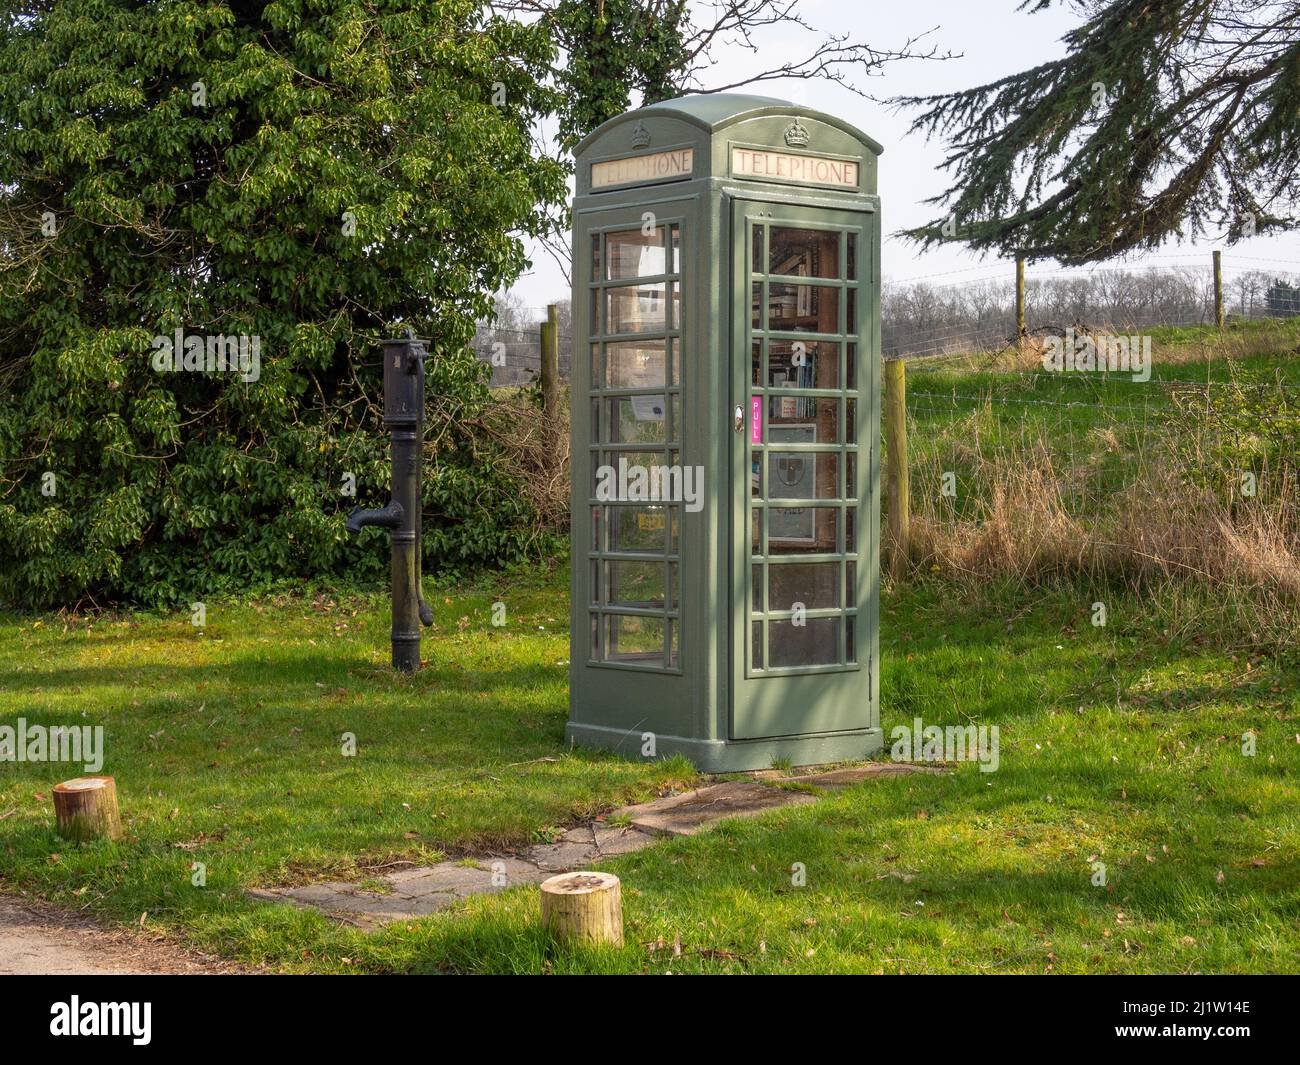 Telephone kiosk and old water pump in the hamlet of Courteenhall, Northamptonshire, UK Stock Photo